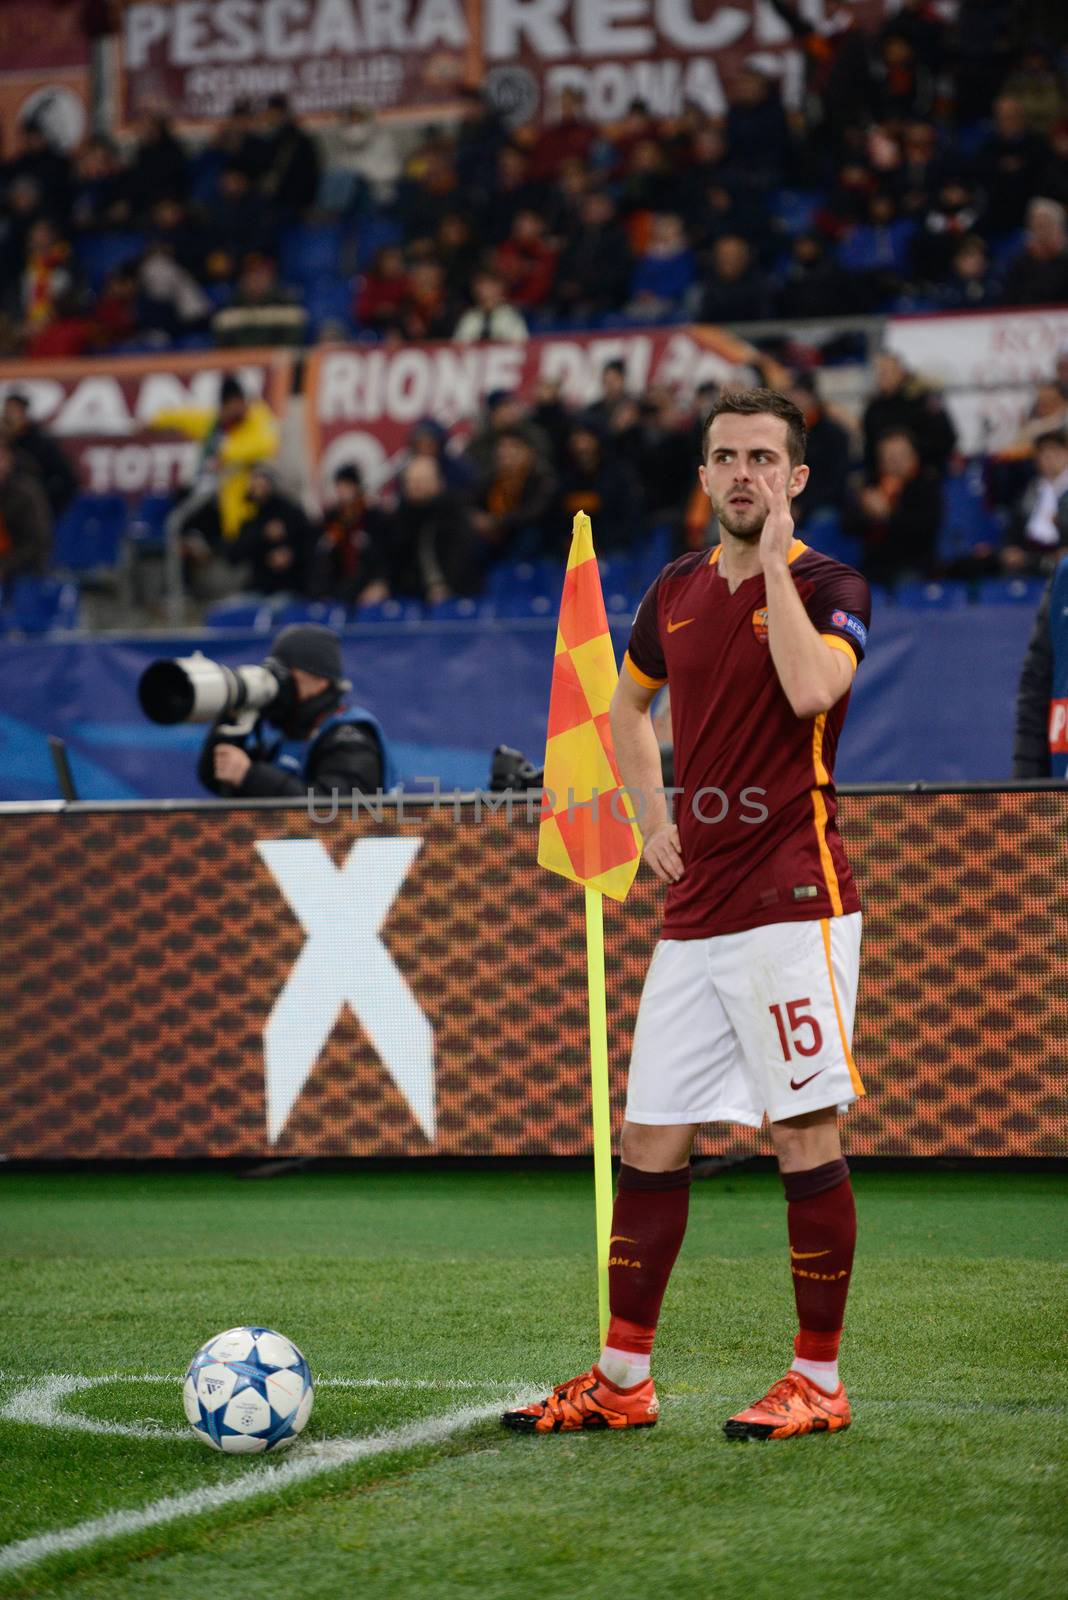 ITALY, Rome: AS  Roma have now progressed to the last 16 in the European Champions League after a goalless draw against BATE Borisov at the Olympic Stadium in Rome on December 9, 2015.